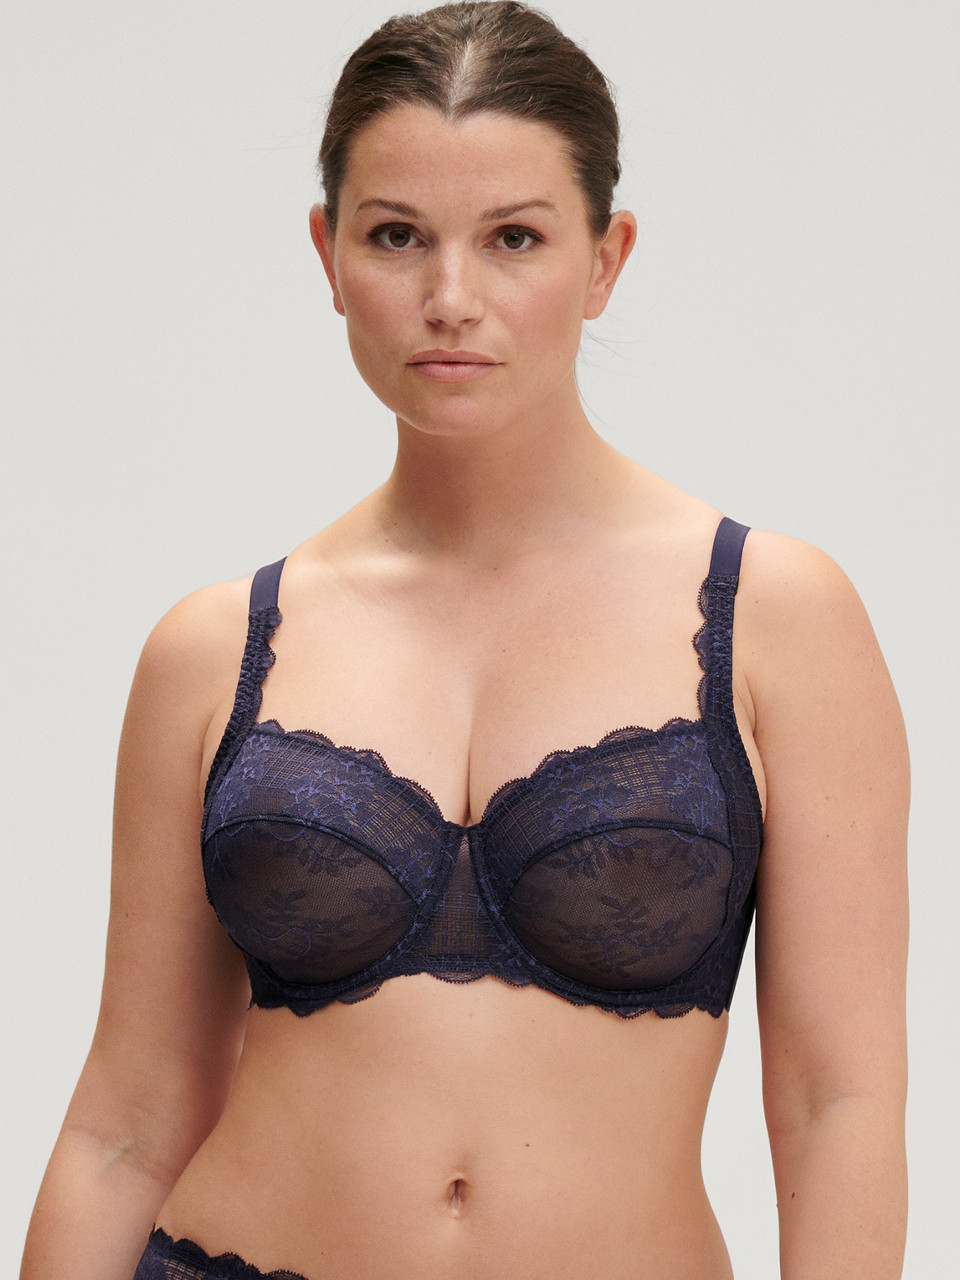 Bra Styles Explained & Bra Industry Terms Defined